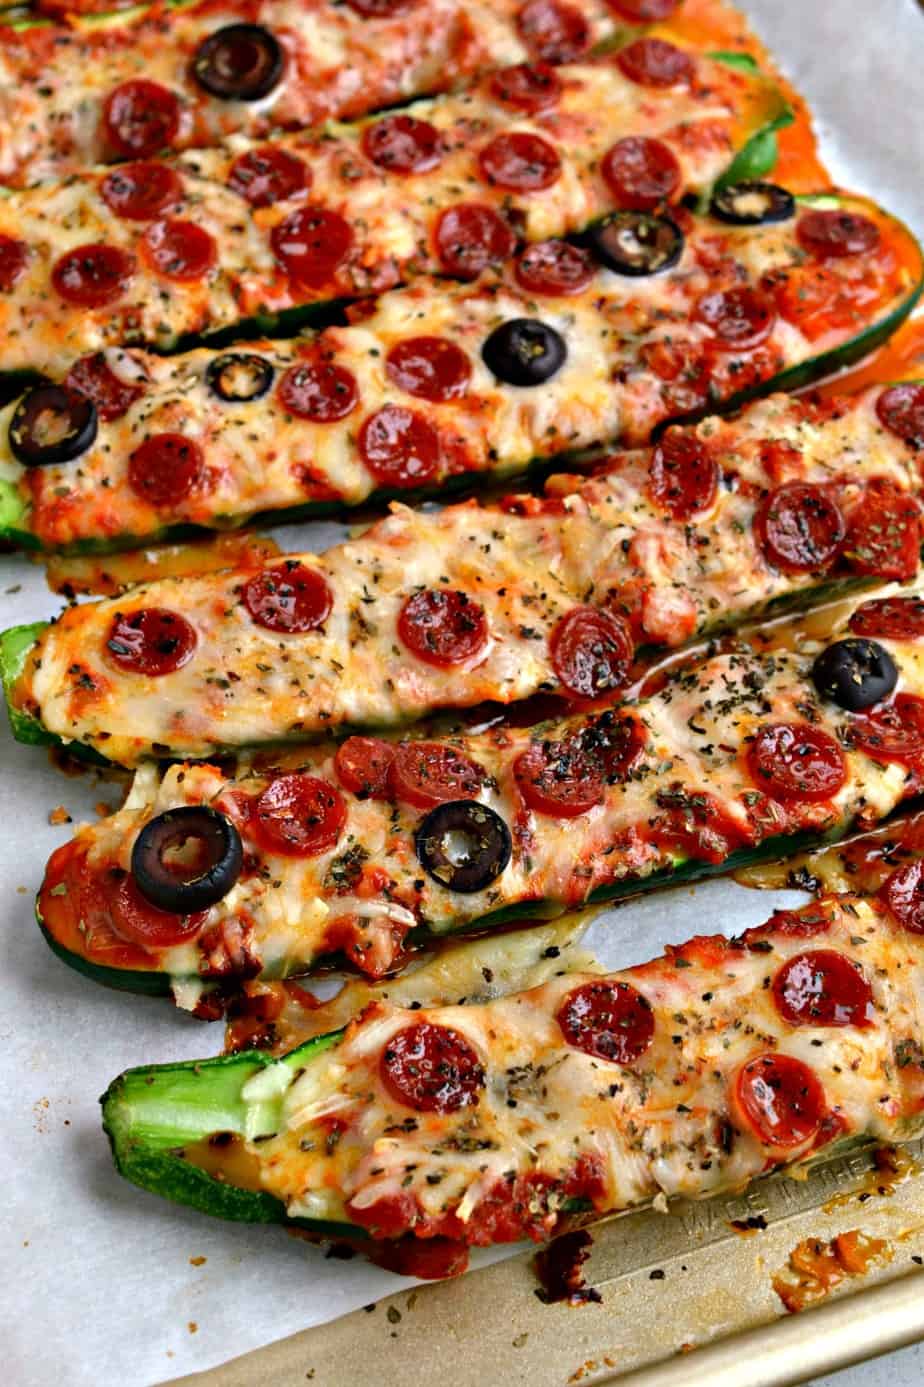 Learn how to make fun and easy low carb Pizza Stuffed Zucchini Boats.